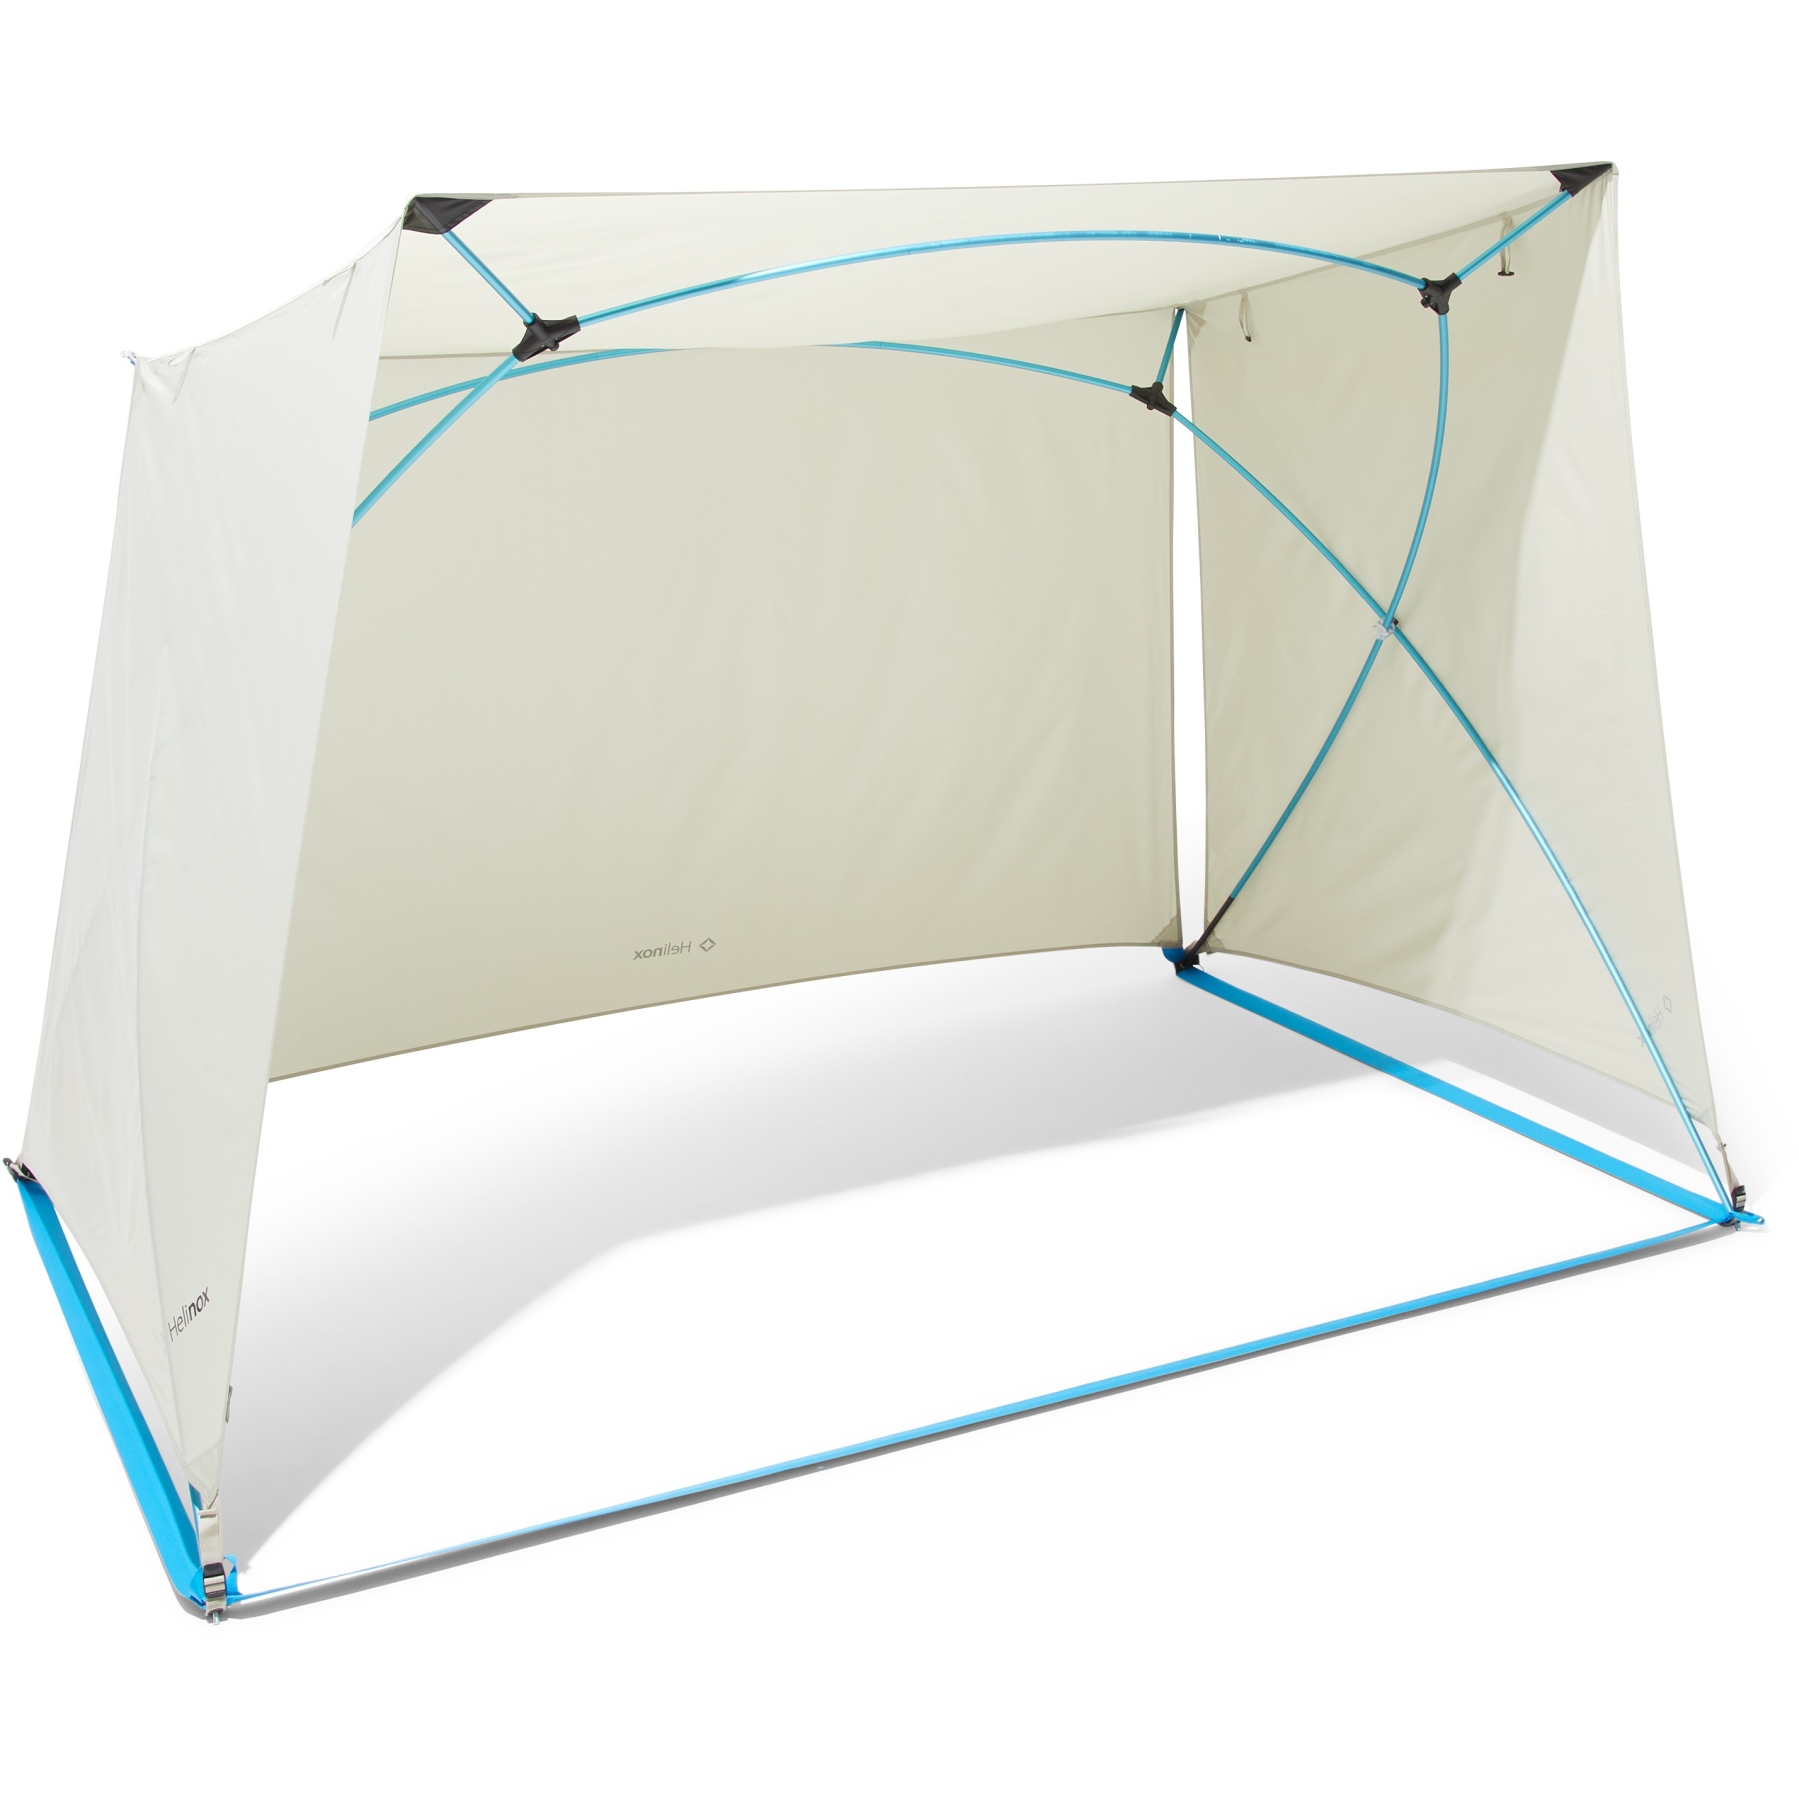 Picture of Helinox Royal Box Shade - Beach Tent - Sand / Cyan Blue